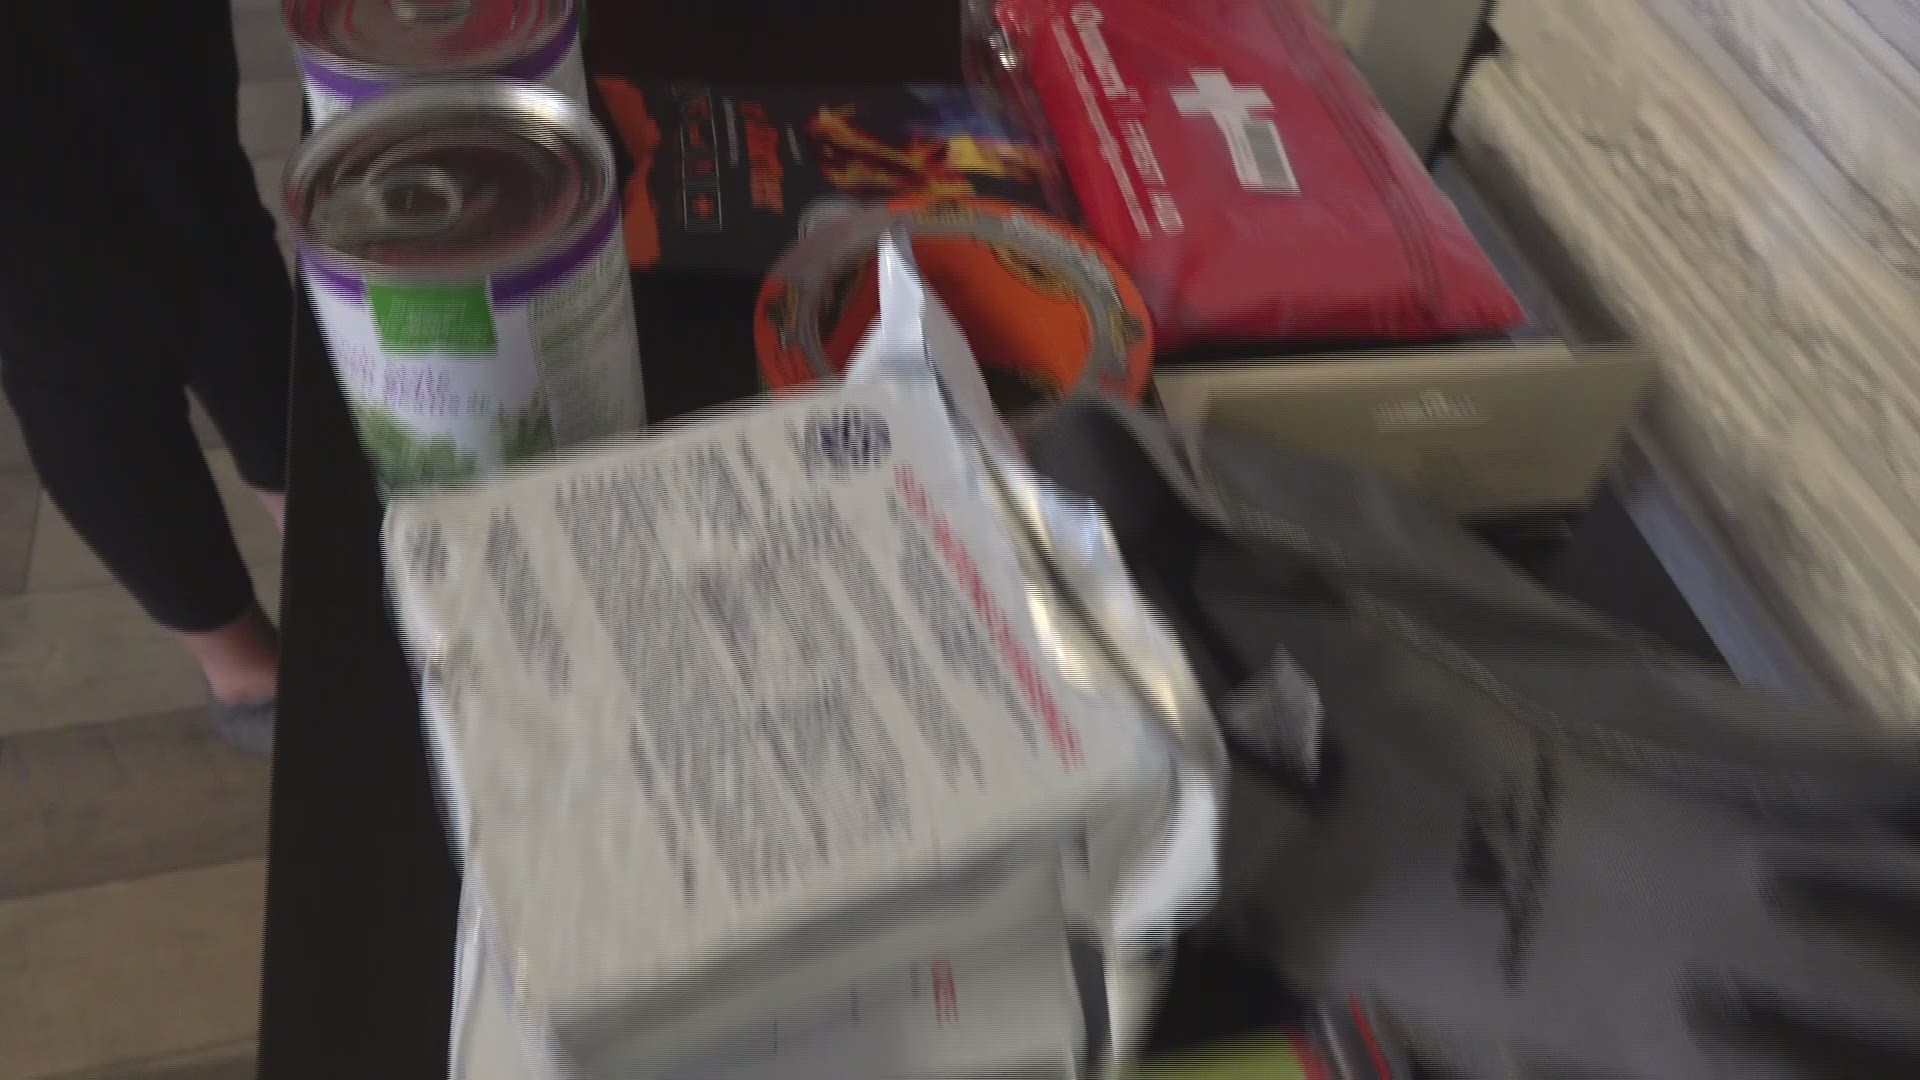 A local teen is creating earthquake prep kits and turning it into a business. Brittany Falkers reports.